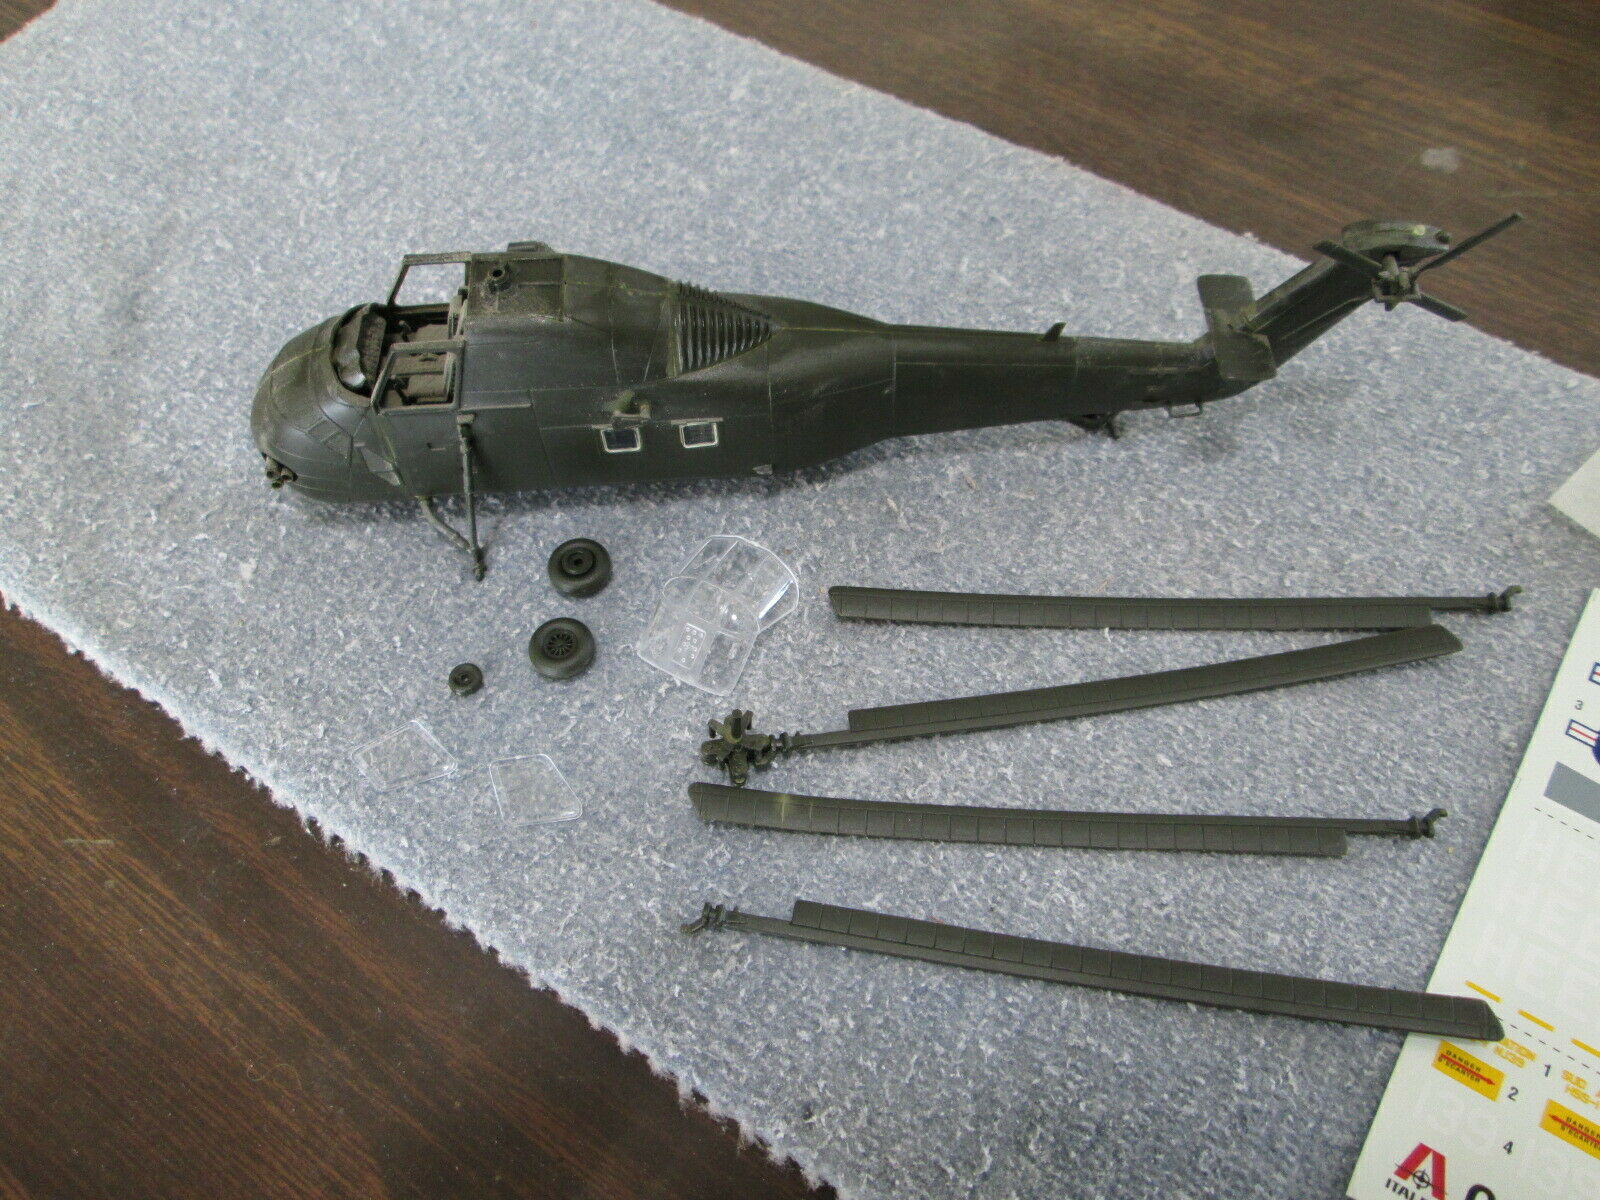 1/72 Scale Italeri Uh-34 Seahorse Helicopter. Partially Built